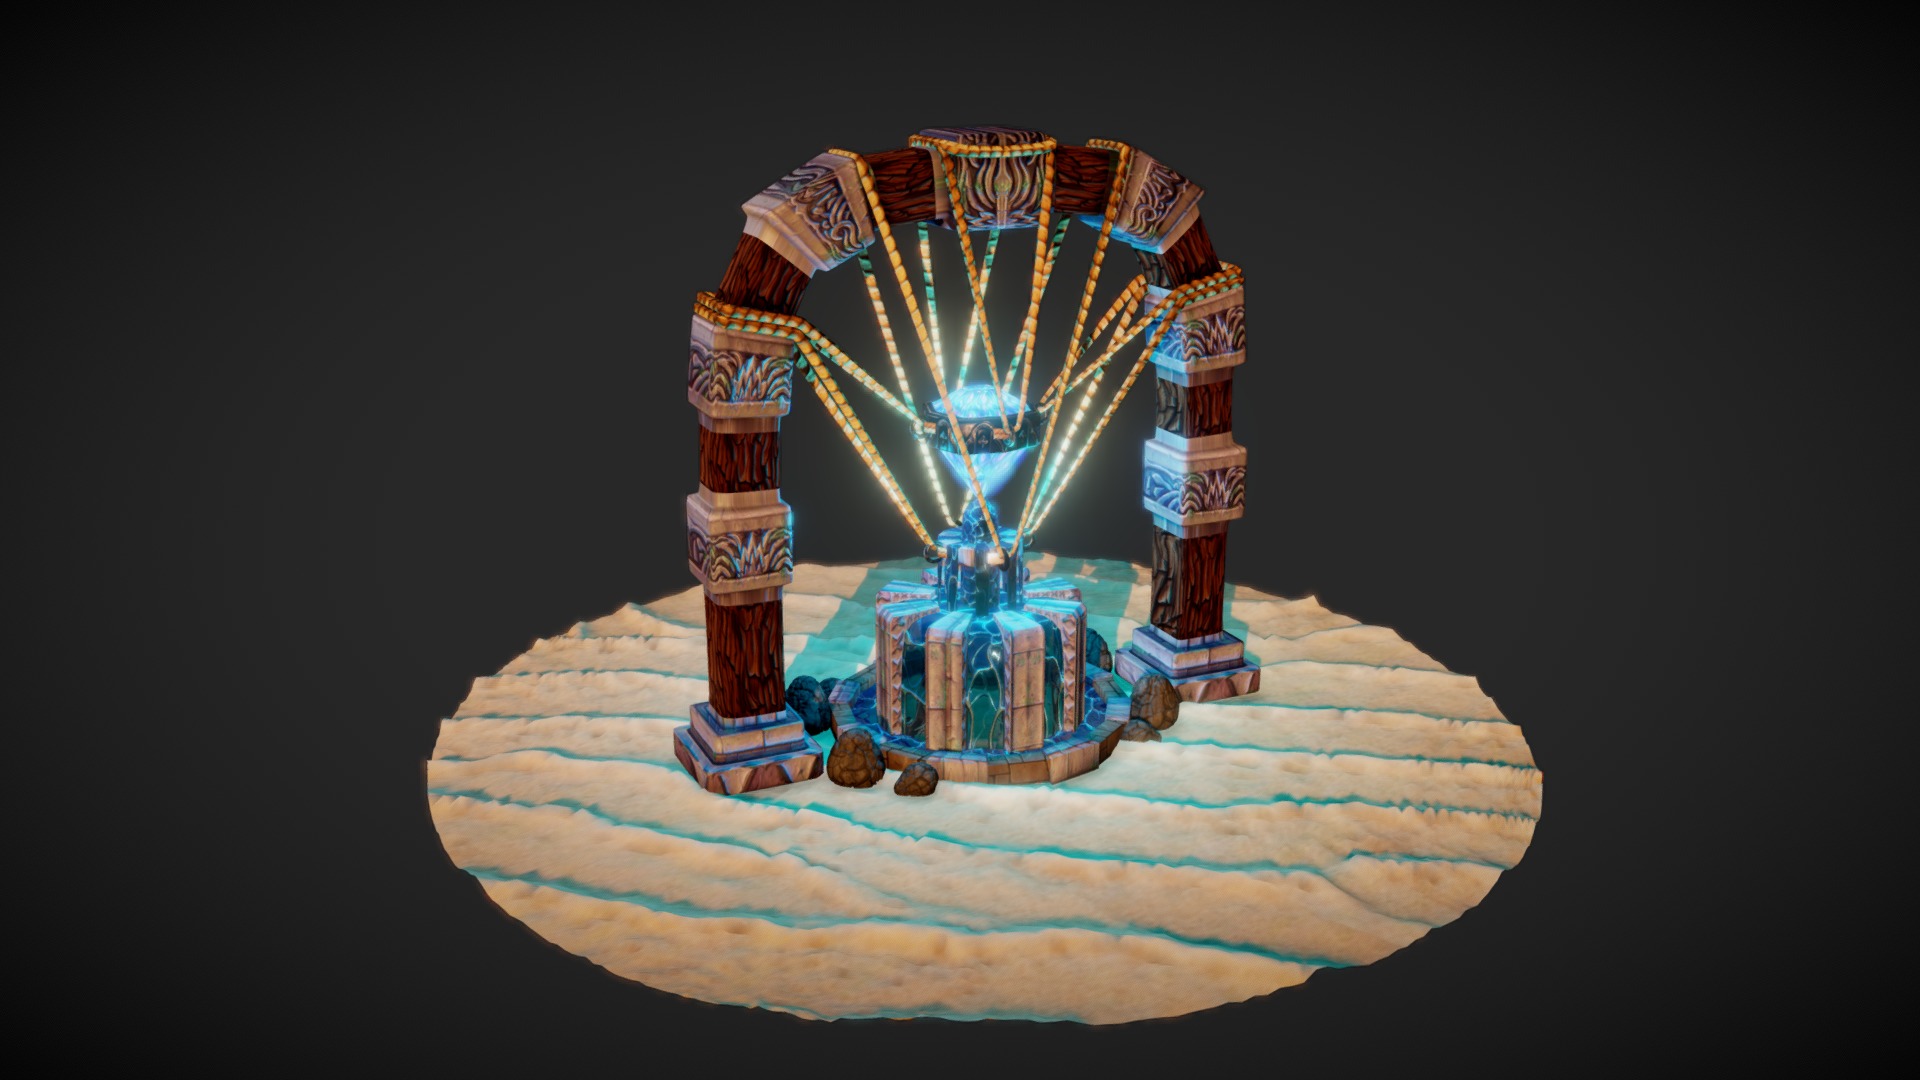 This a 3D model of a Stylized Fountain :)

You can also find an timelaspe version of this model on Youtube : 
https://www.youtube.com/watch?v=4uFbQE8Pybw&amp;index=18&amp;list=PLKIeUKeU92smbJrilcYwOn6pwGgBBMEBR&amp;t=0s

www.valentin-poinot.com 

Enjoy :) - Stylized Fountain - Buy Royalty Free 3D model by ValBoise 3d model